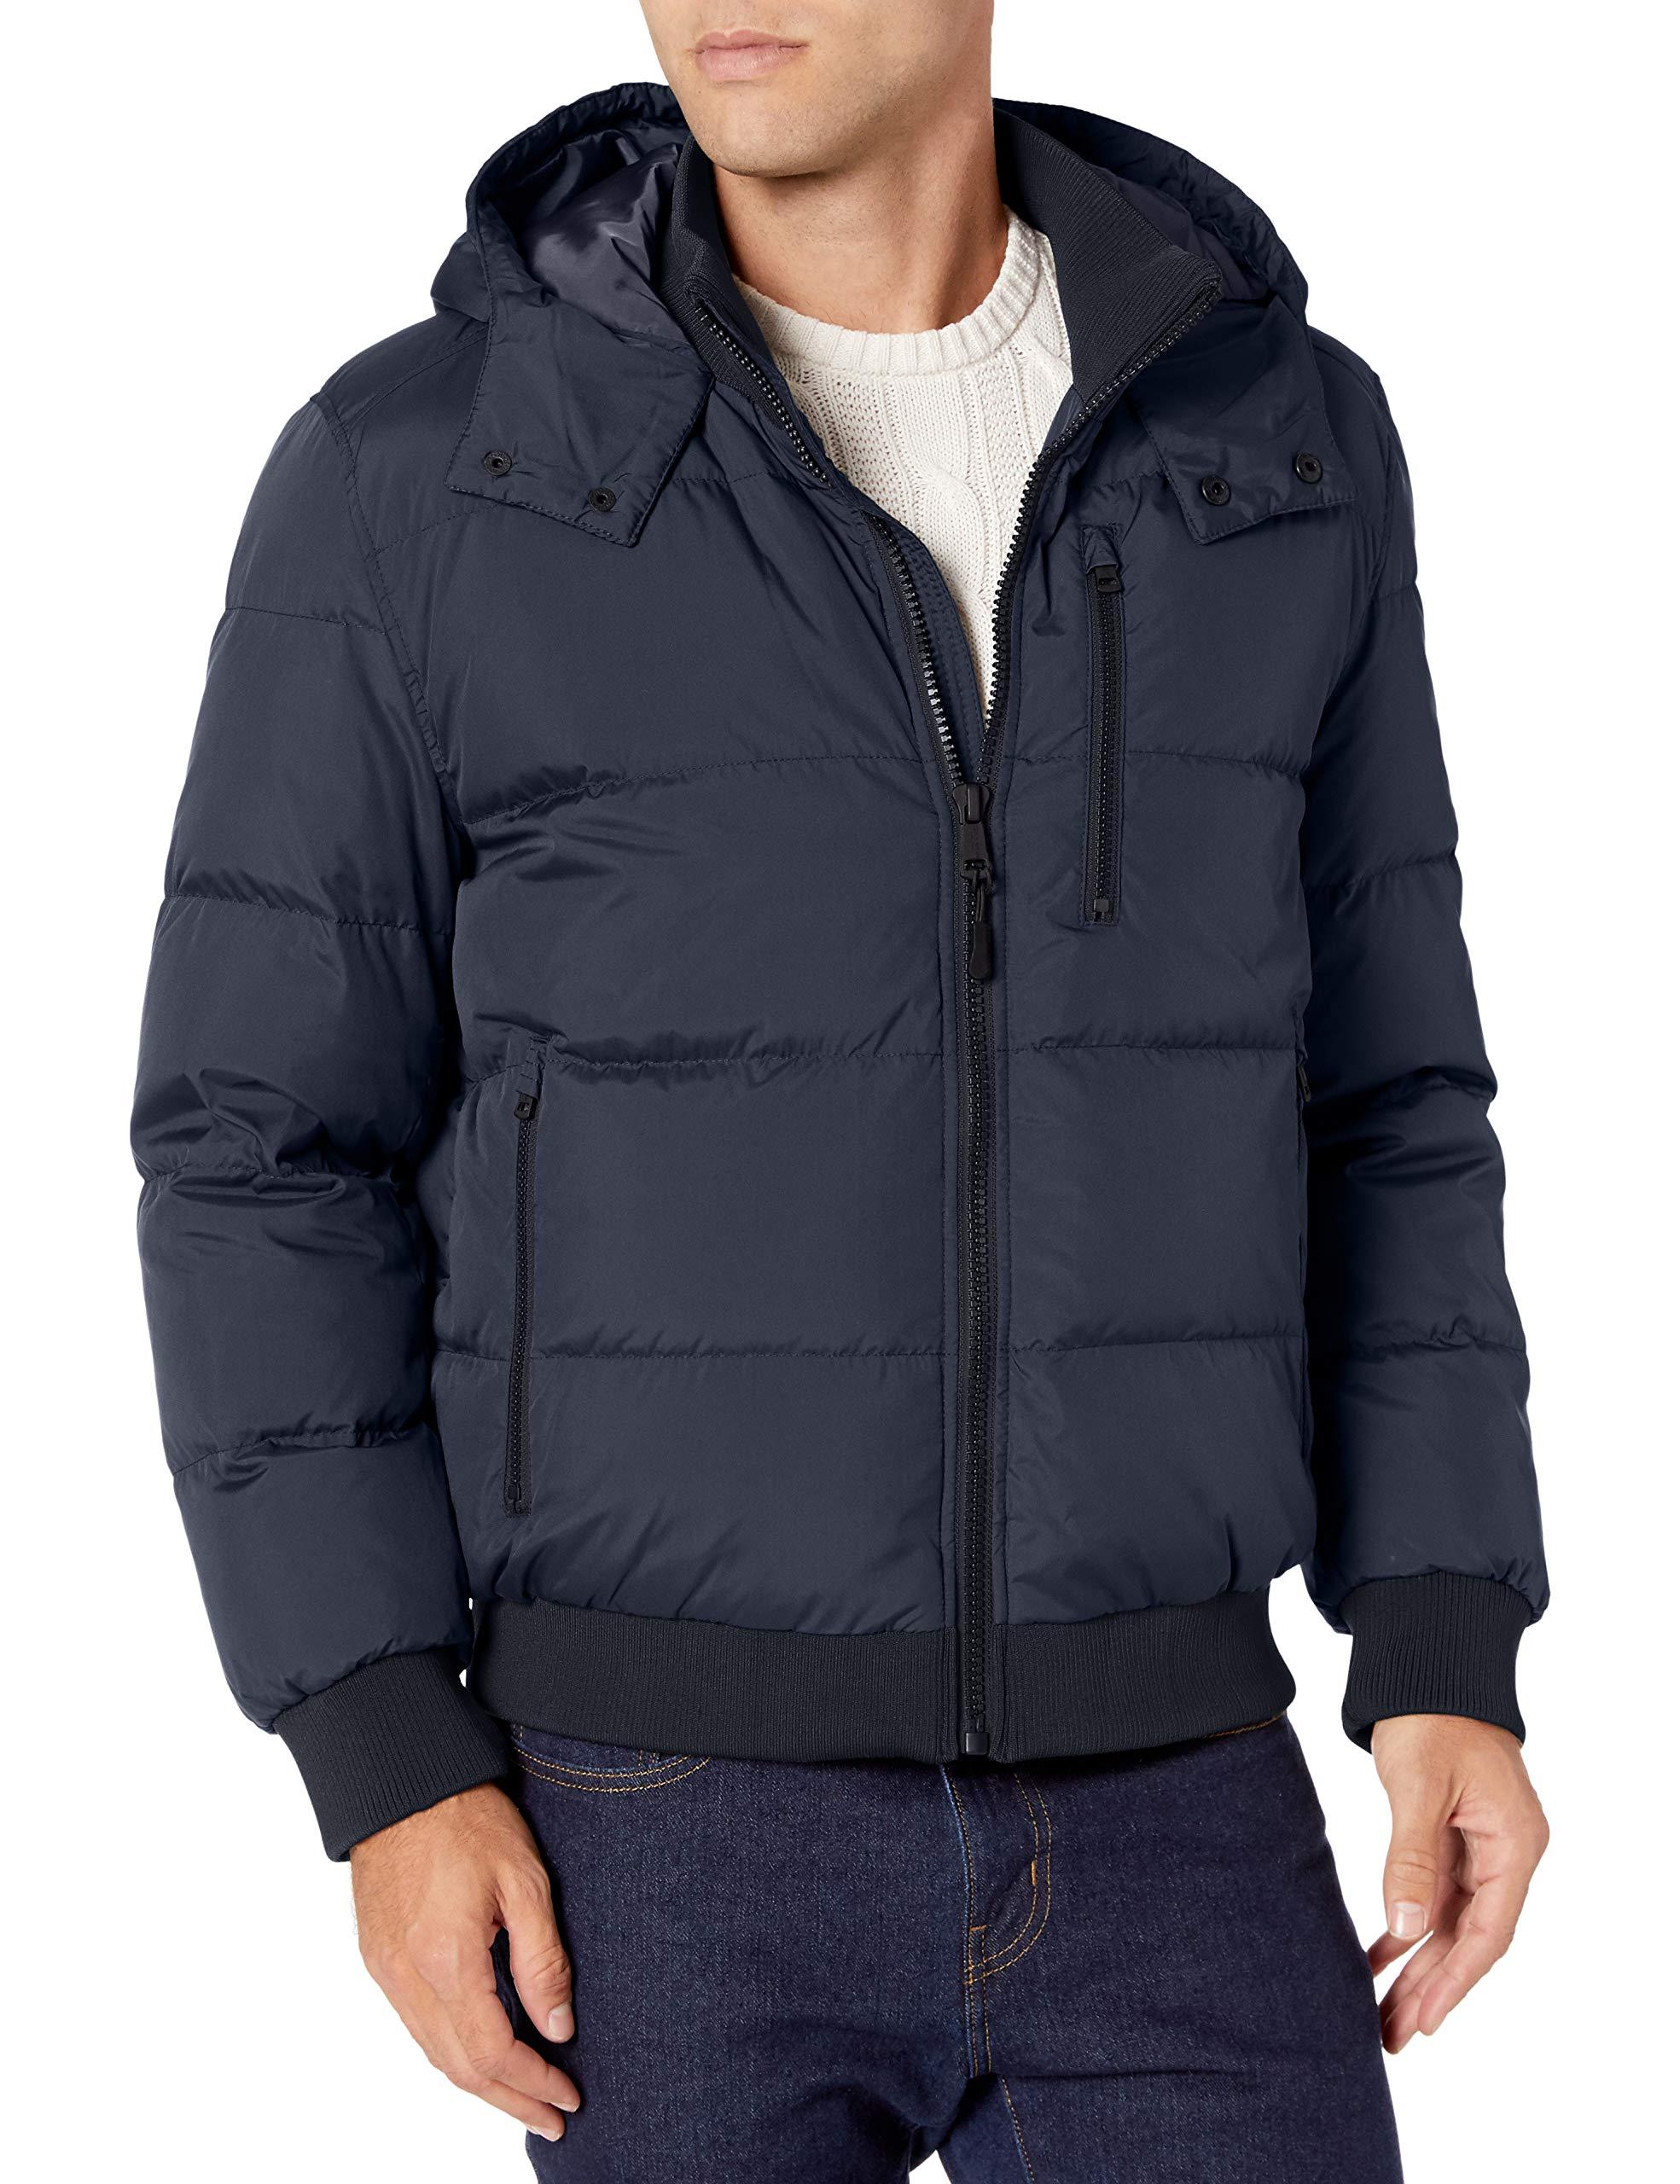 Cole Haan Hooded Bomber Down Jacket in Navy (Blue) for Men - Save 62% ...